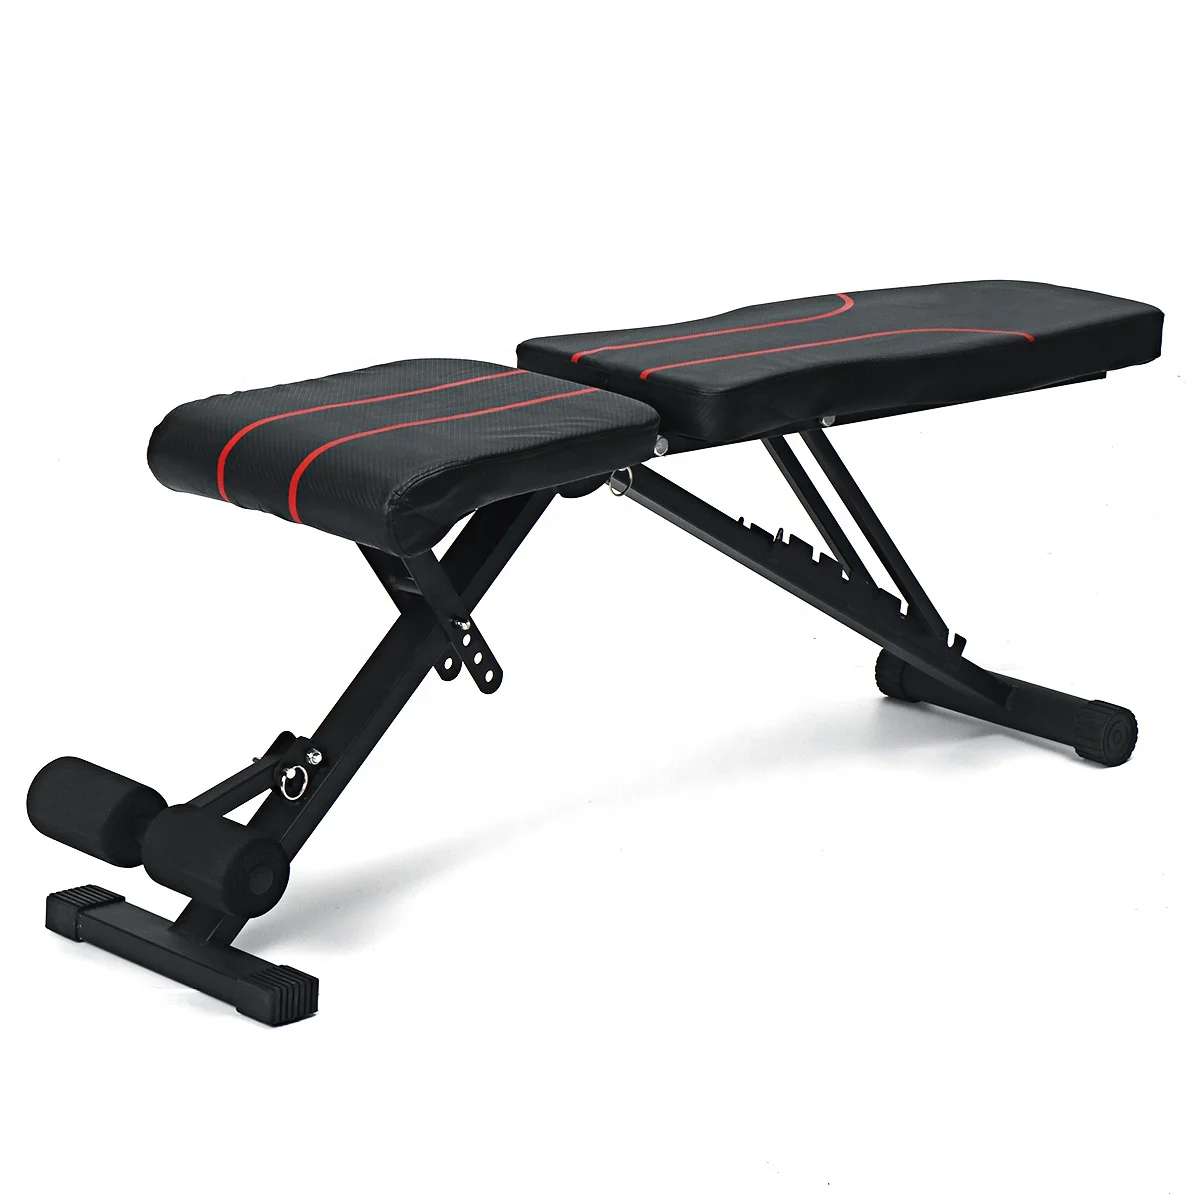 

TY Adjustable Sit Up Bench Foldable Dumbbell Bench Home Gym Fitness Workout Abdominal Bench Weightlifting Exercise Training New, Black+red